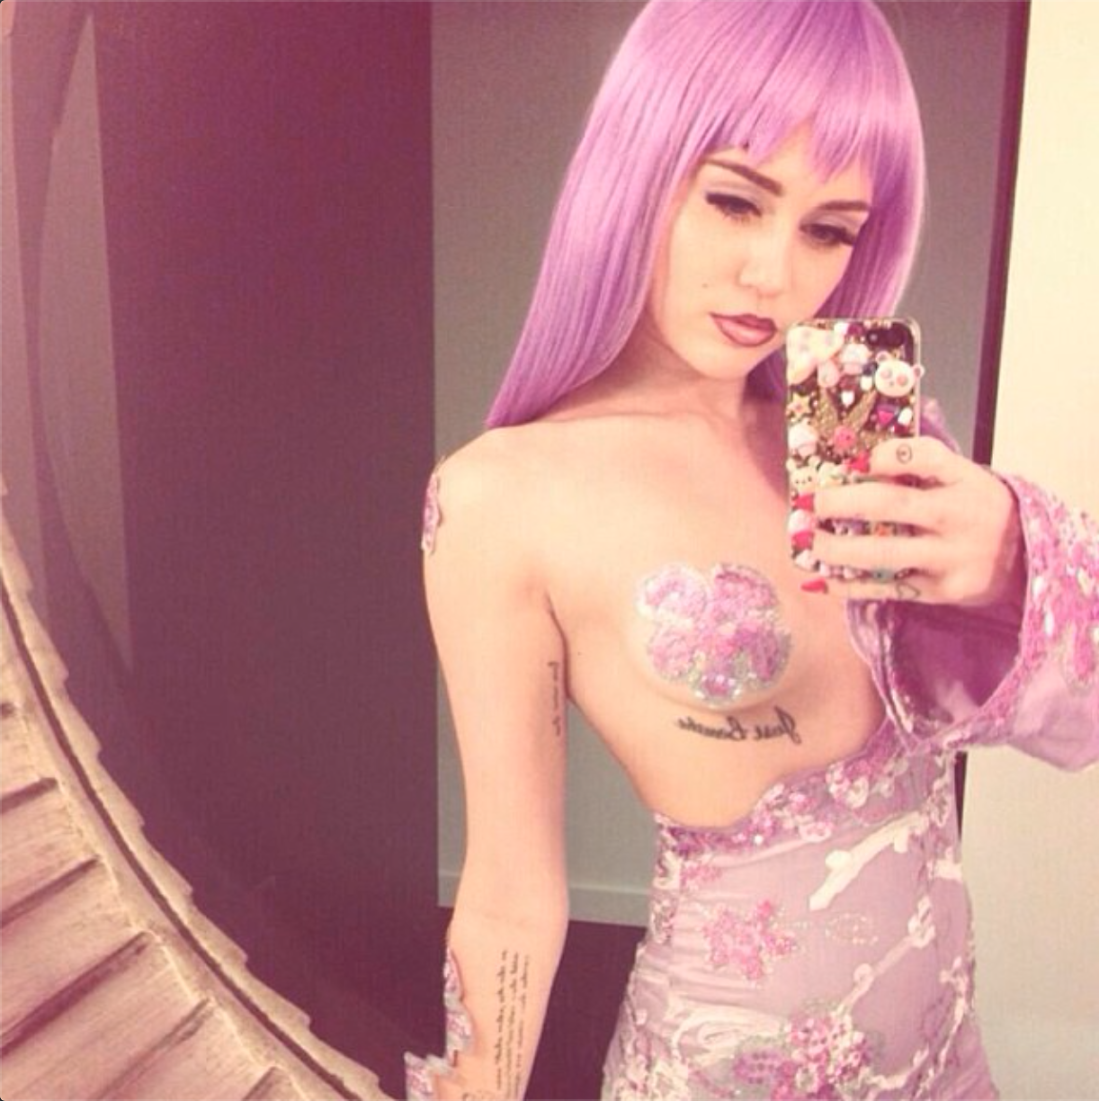 Miley Cyrus exposes her boob in rapper Lil Kim costume for Halloween